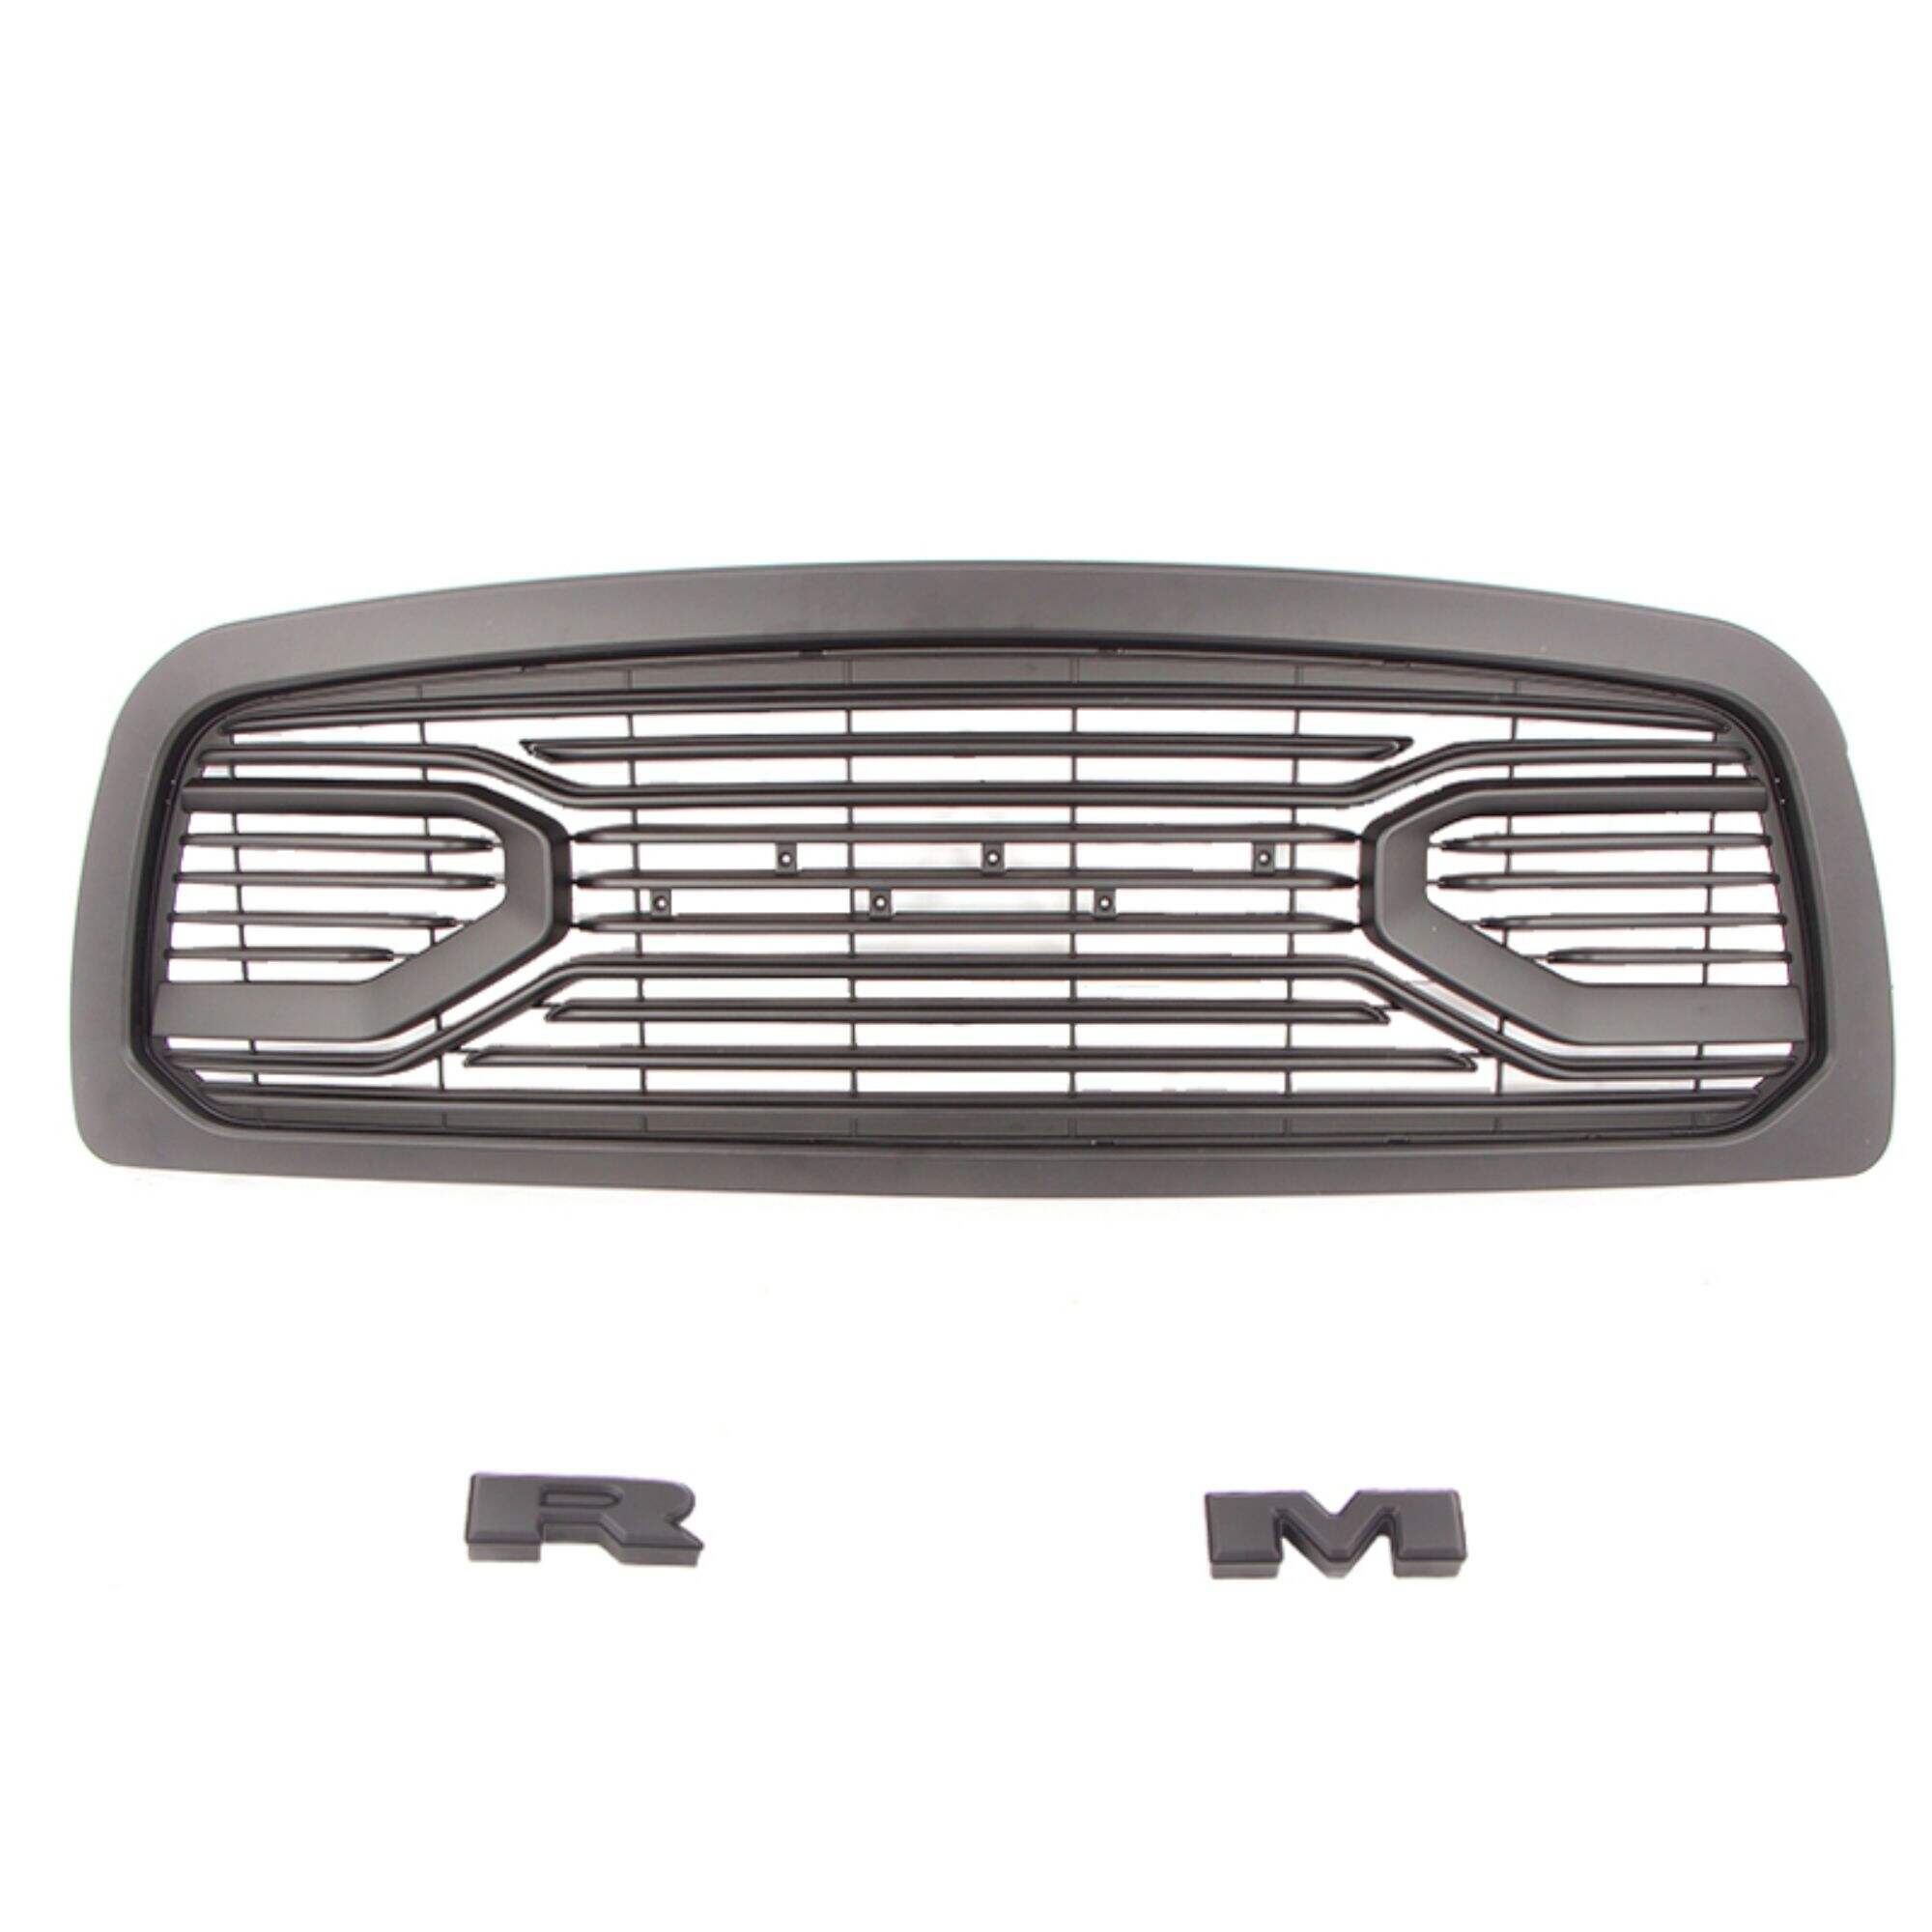 DODD Replacement Front Chrome / Black Grille Fit For 2009-2012 Dodge Ram 1500